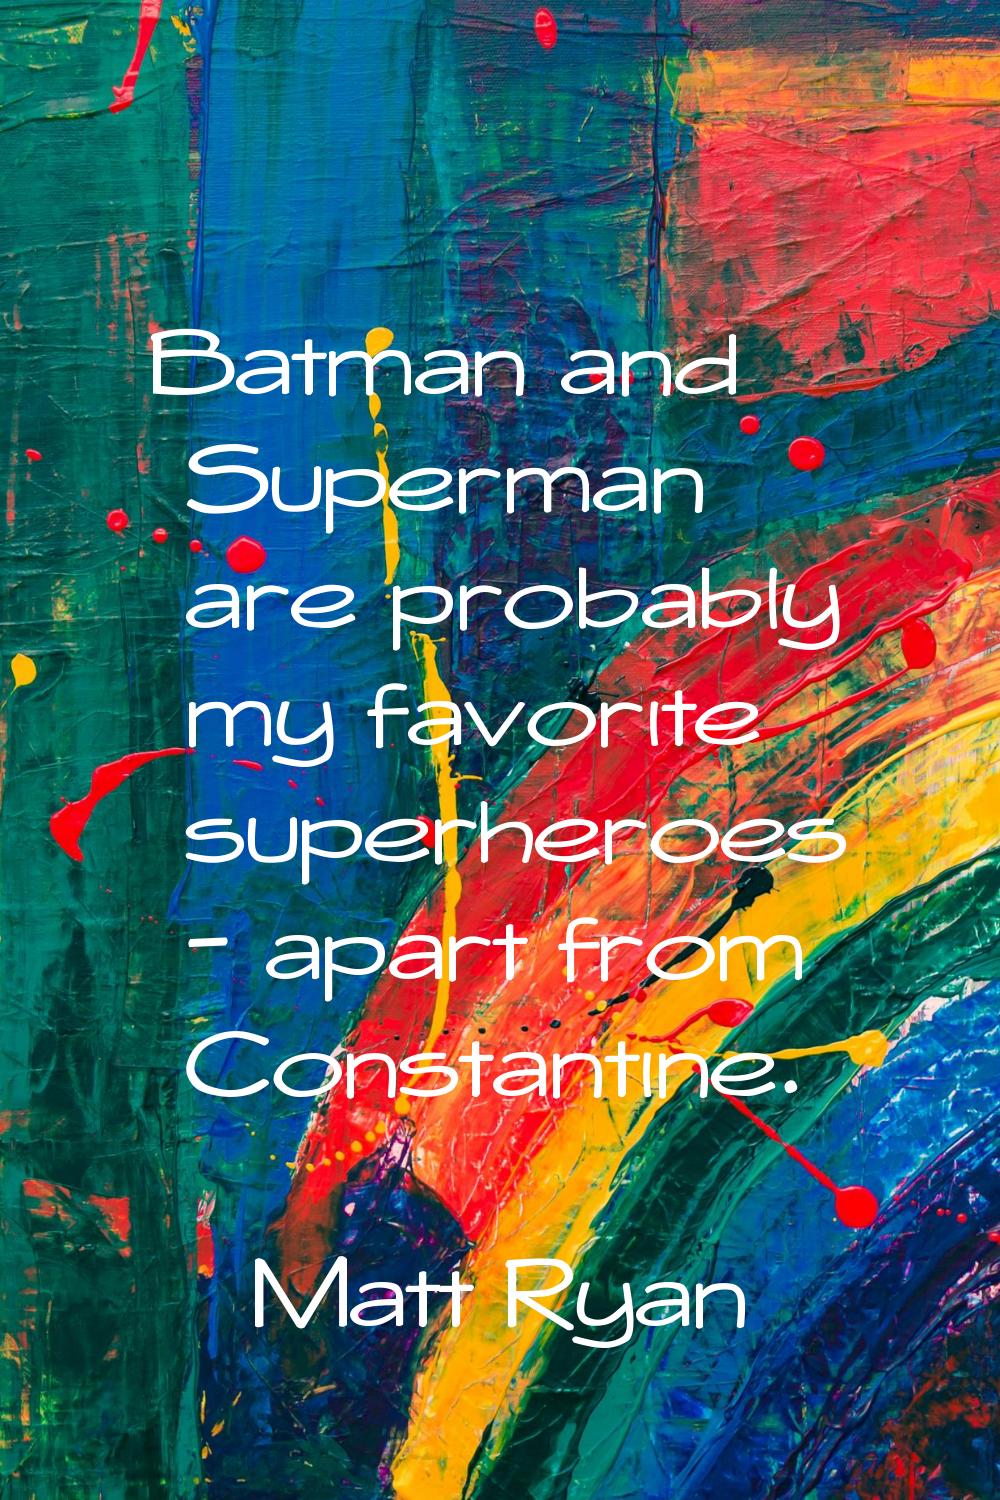 Batman and Superman are probably my favorite superheroes - apart from Constantine.